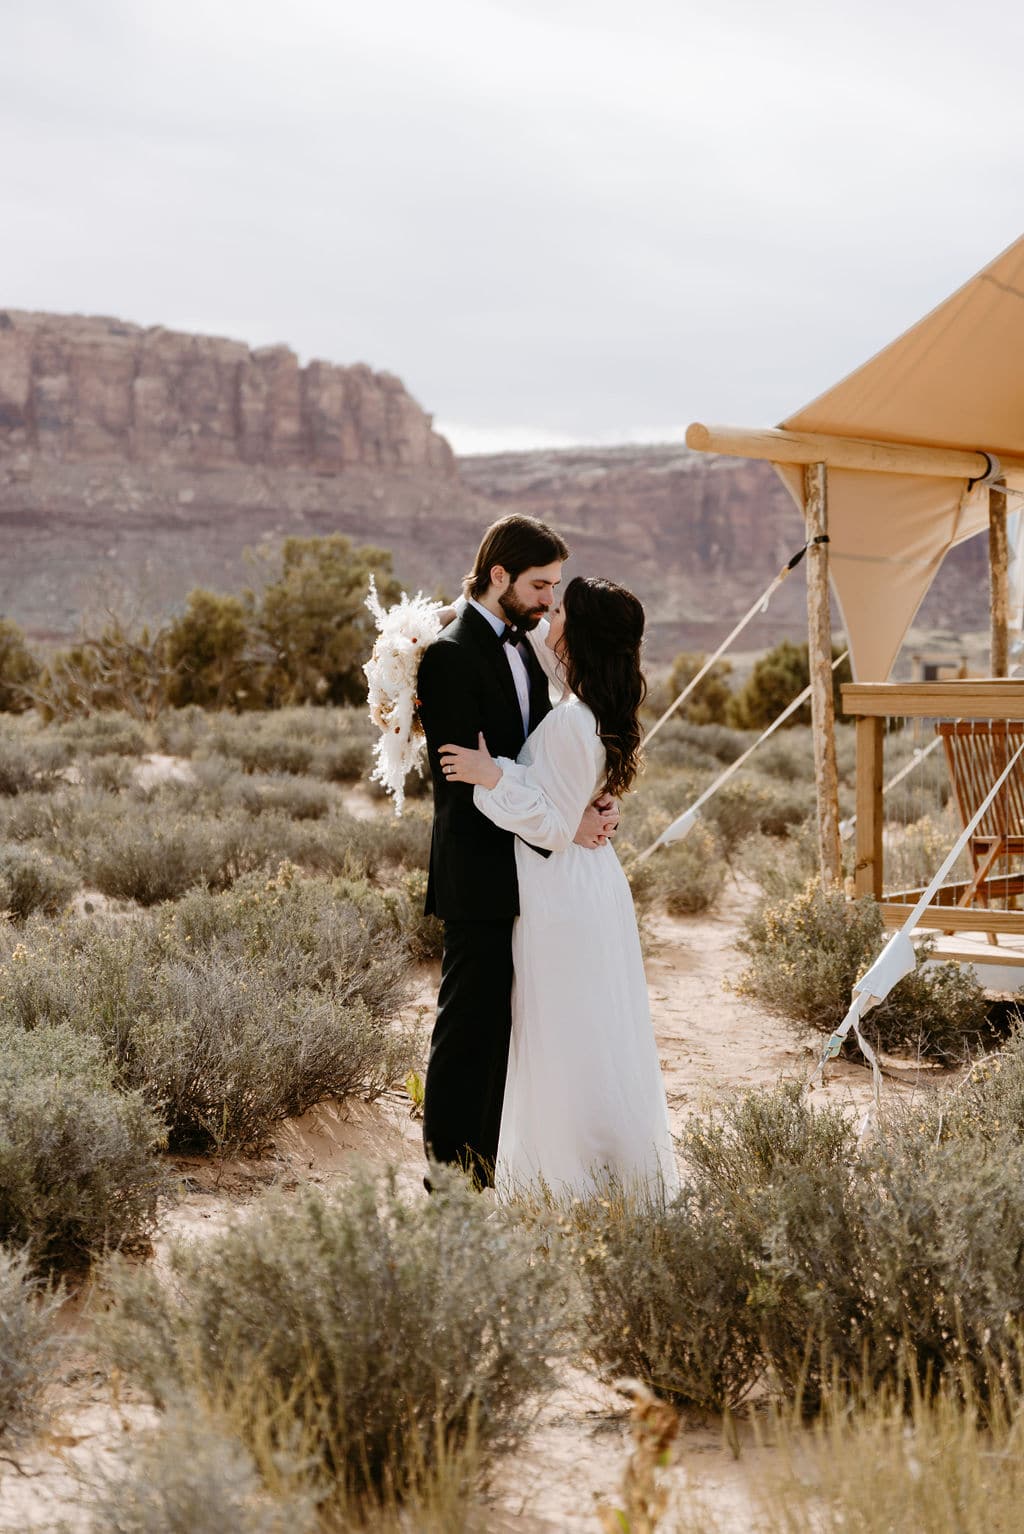 Bride and Groom Portrait at Glamping Tent in Moab Utah 